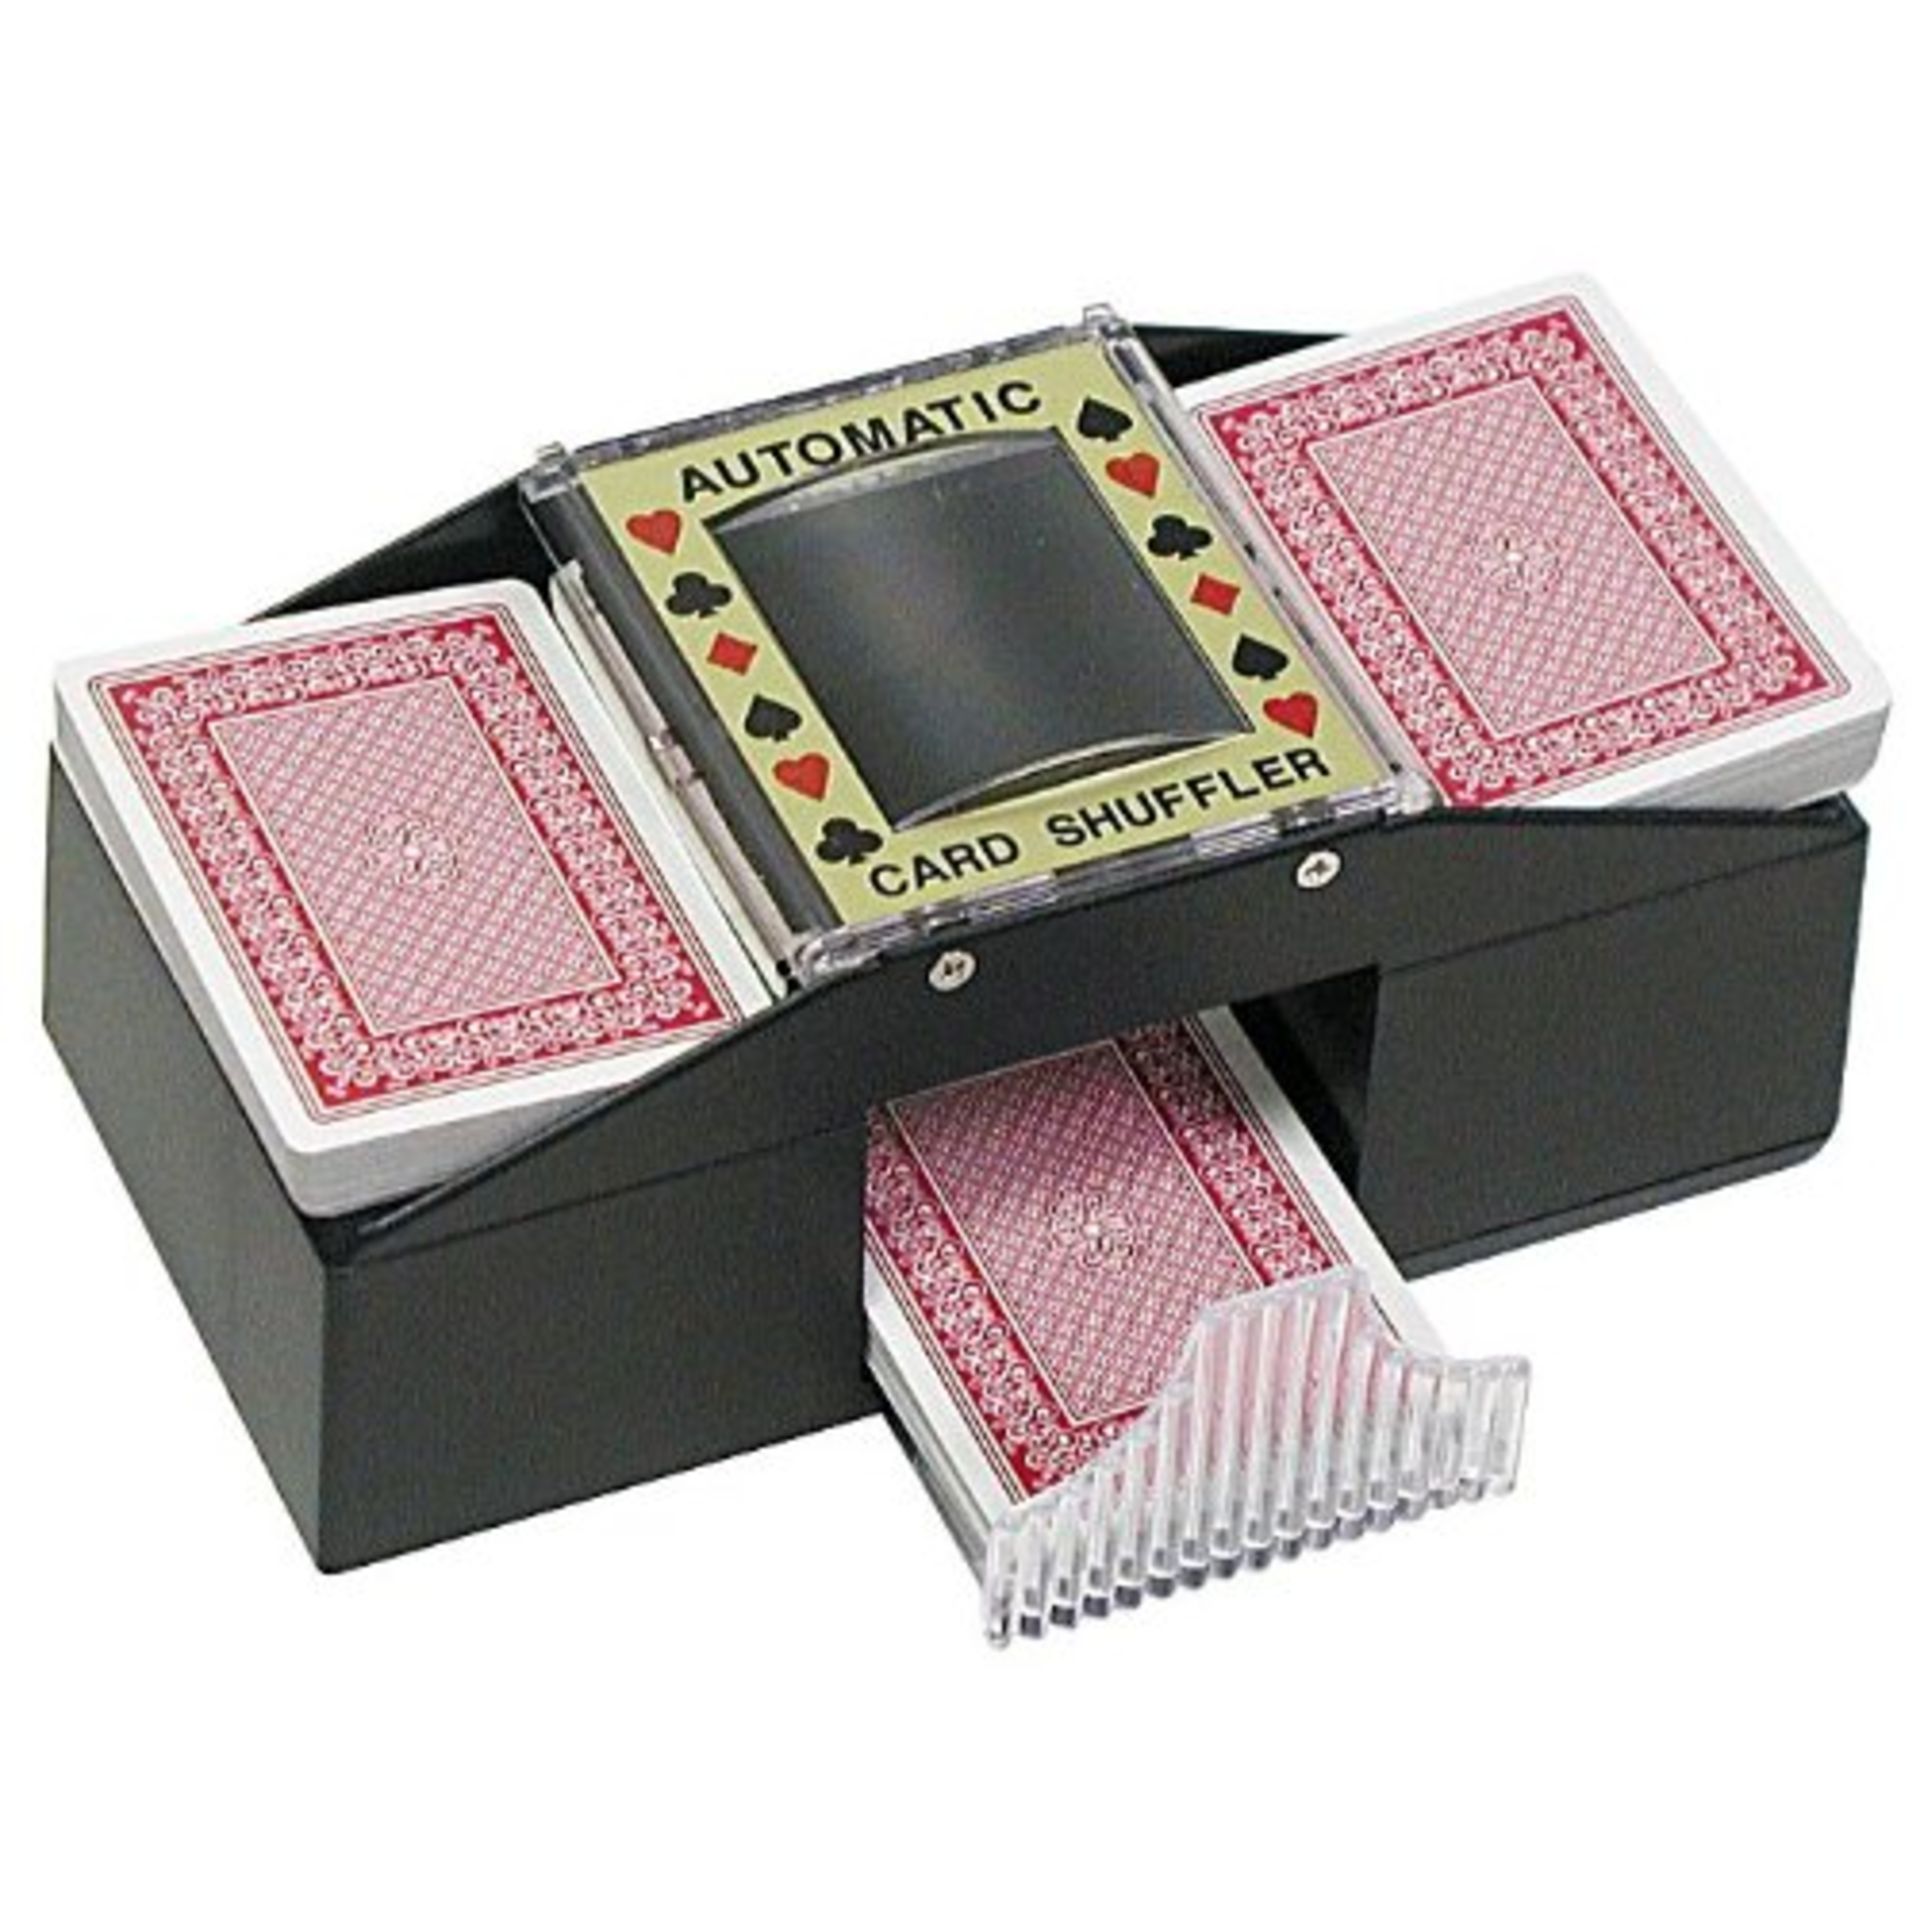 V Brand New Automatic Card Shuffler - Operates on 2 x C Batteries (Not Included) - Automatically